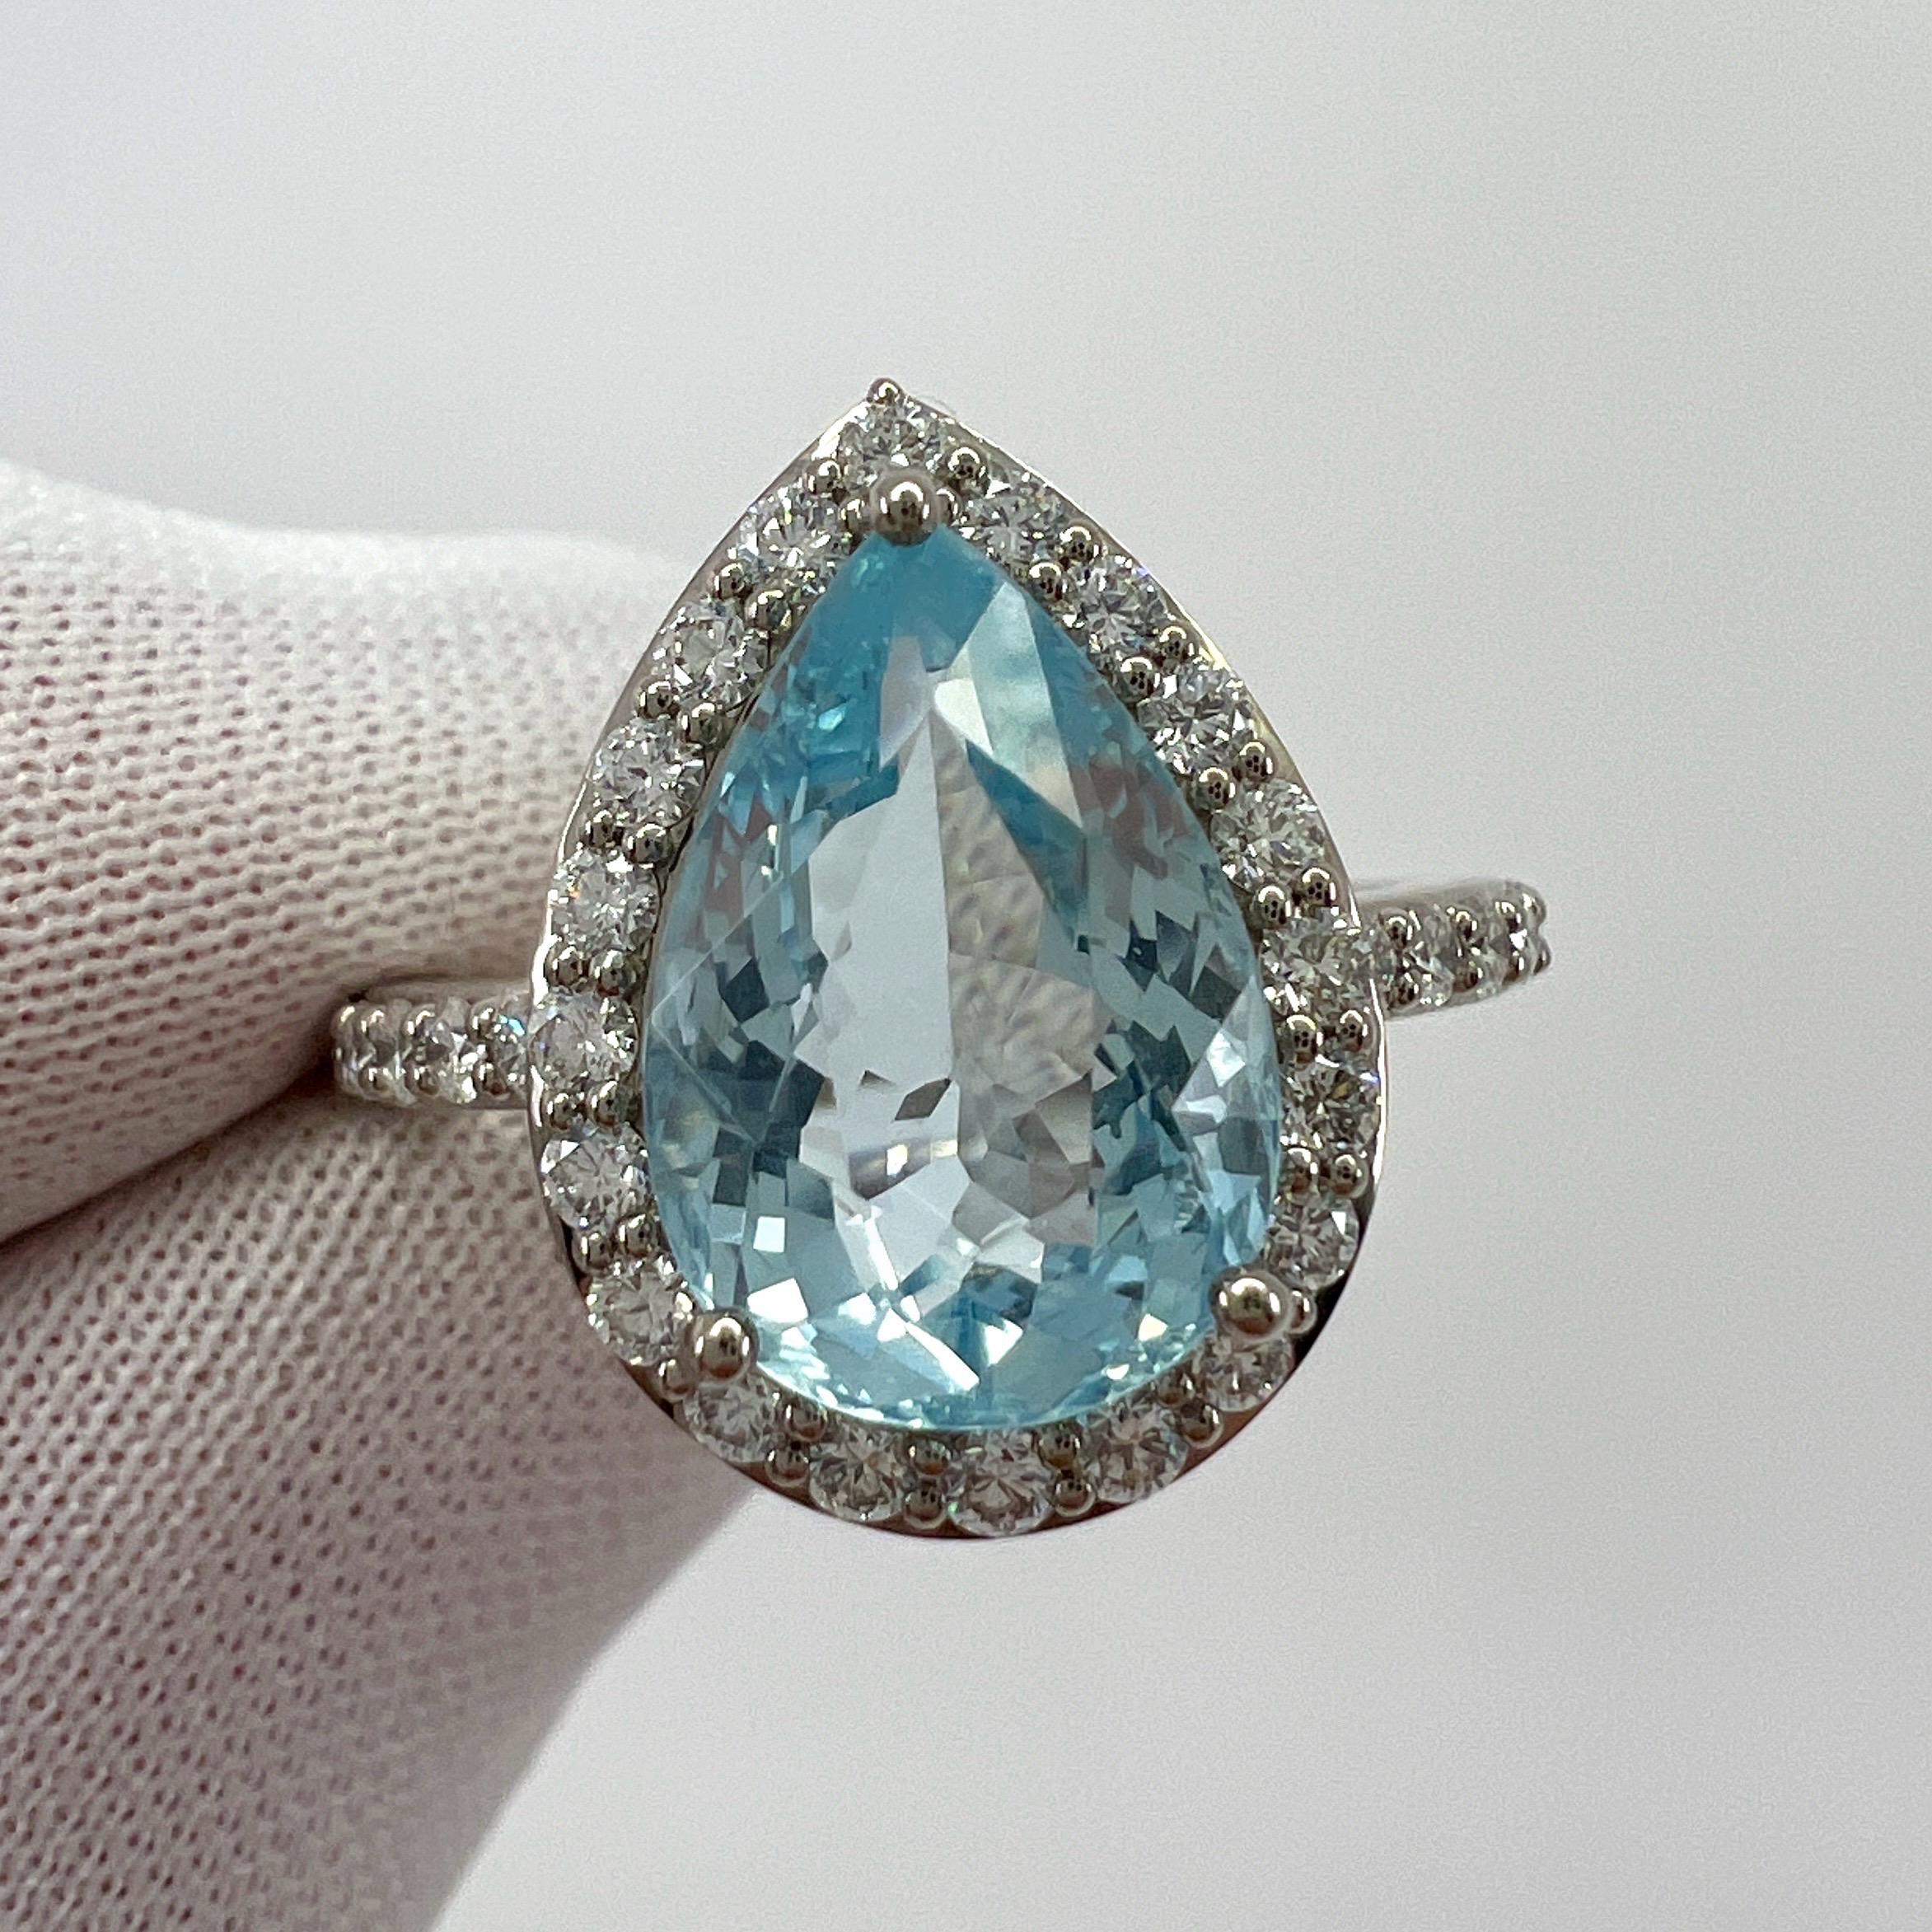 Fine Blue Aquamarine & Diamond 18k White Gold Pear Cut Cluster Halo Ring.

Stunning 18k white gold ring with a beautiful fine blue aquamarine weighing 3.07 carat.
A top grade aquamarine with an excellent pear cut and beautiful bright blue colour. 